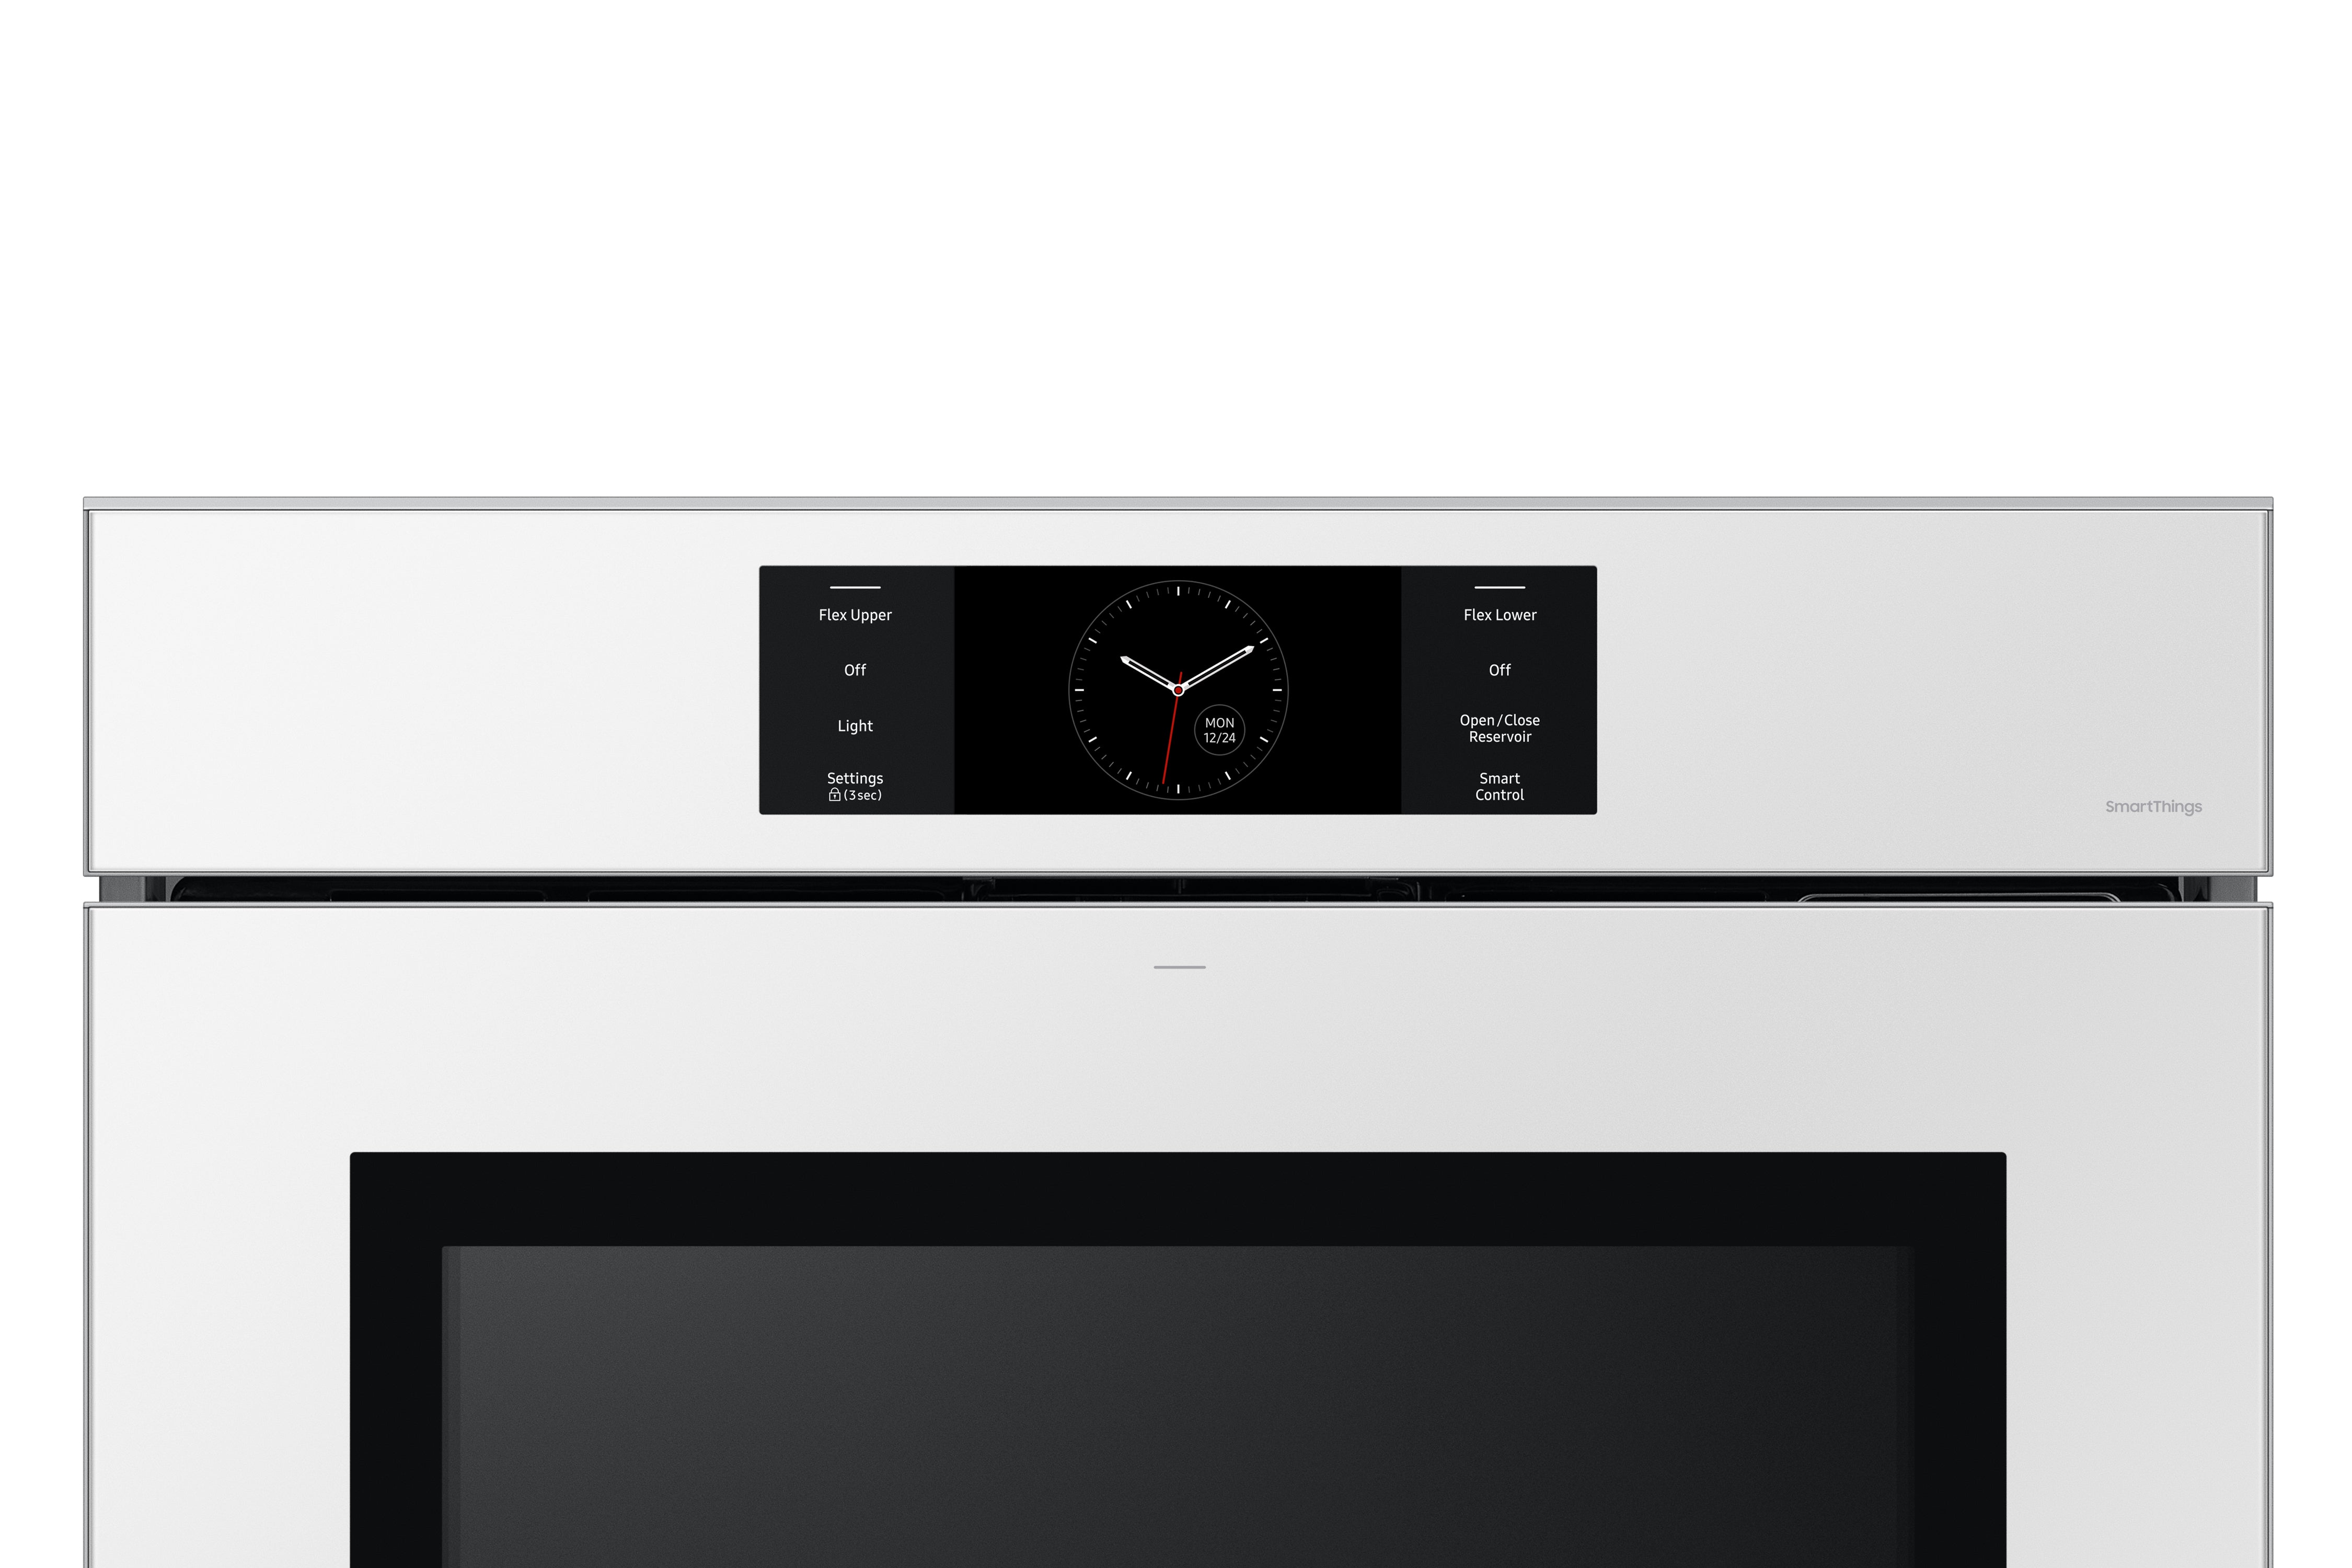 Samsung - 5.1 cu. ft Single Wall Oven in Silver - NV51CB700S12AA